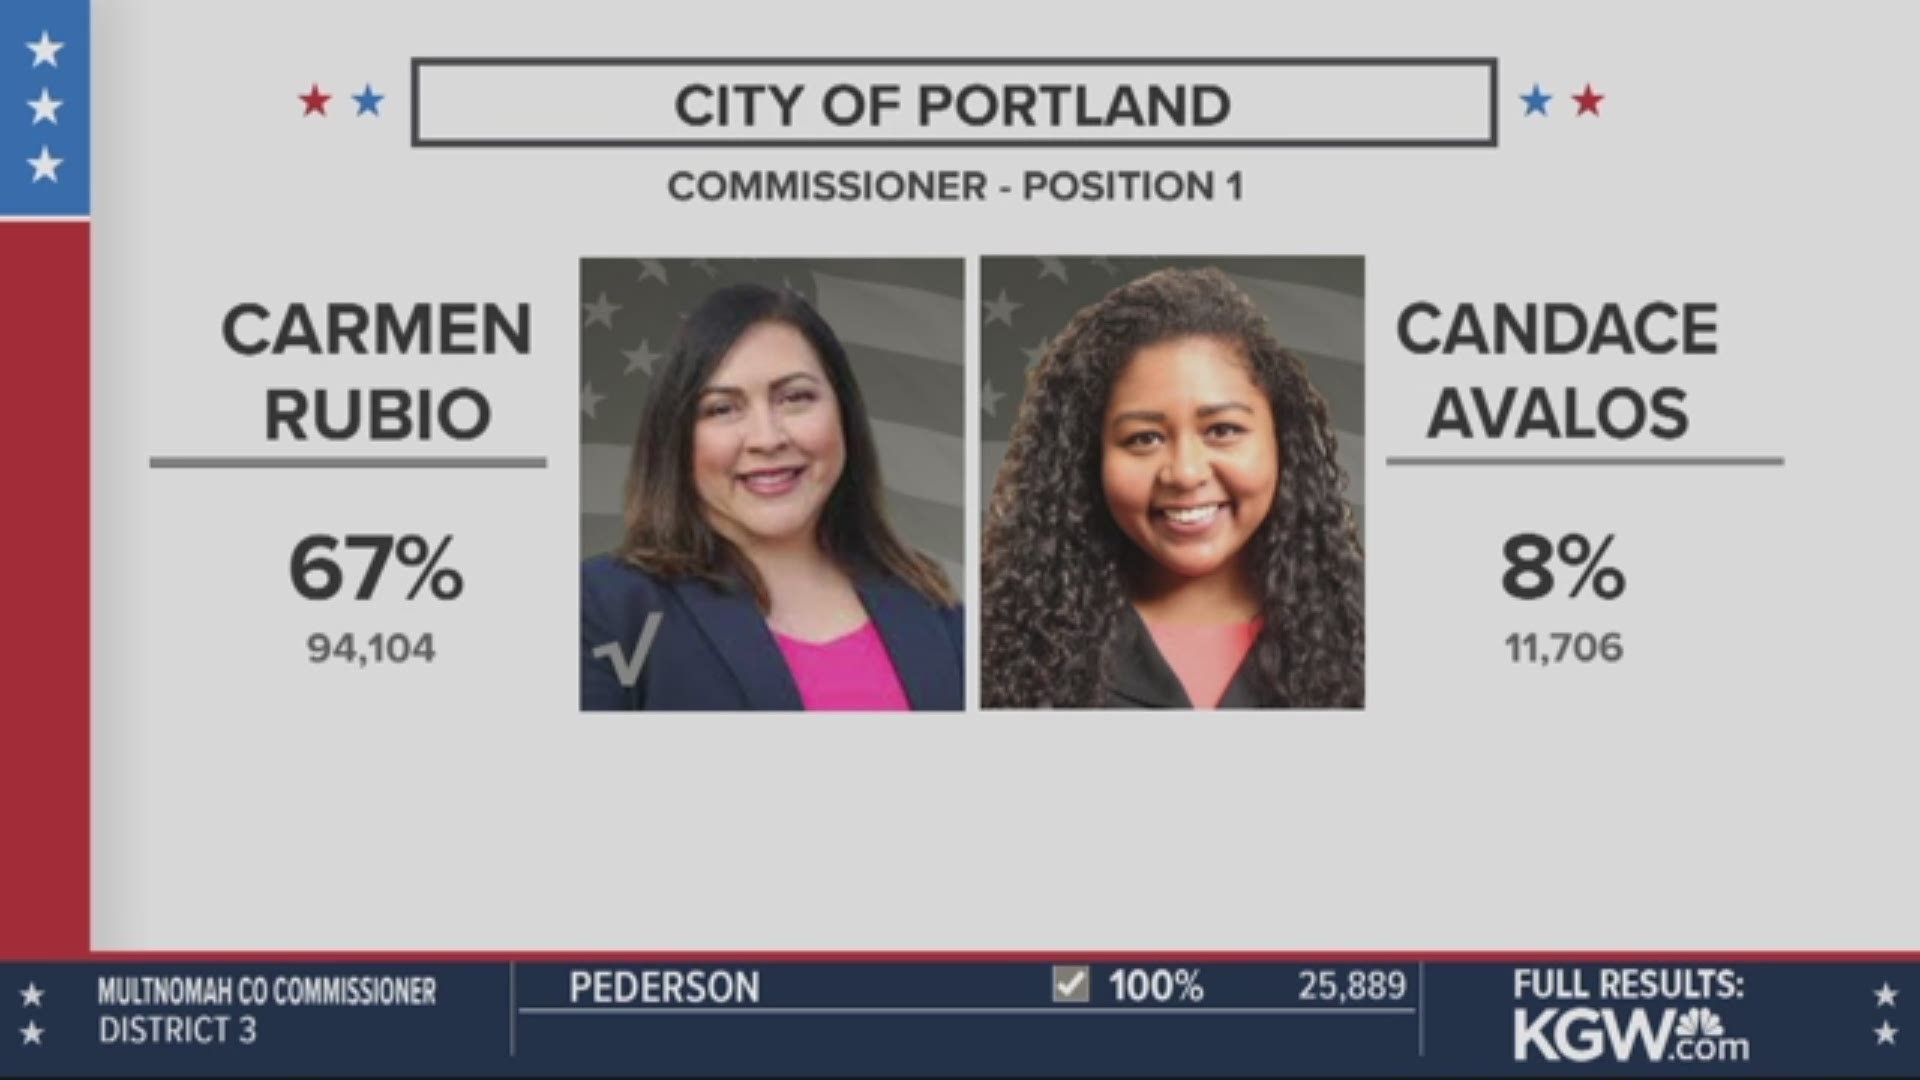 Carmen Rubio will replace Amanda Fritz on the Portland City Council after receiving 67% of the vote in Tuesday’s primary election. Rubio is the first Latinx candidat